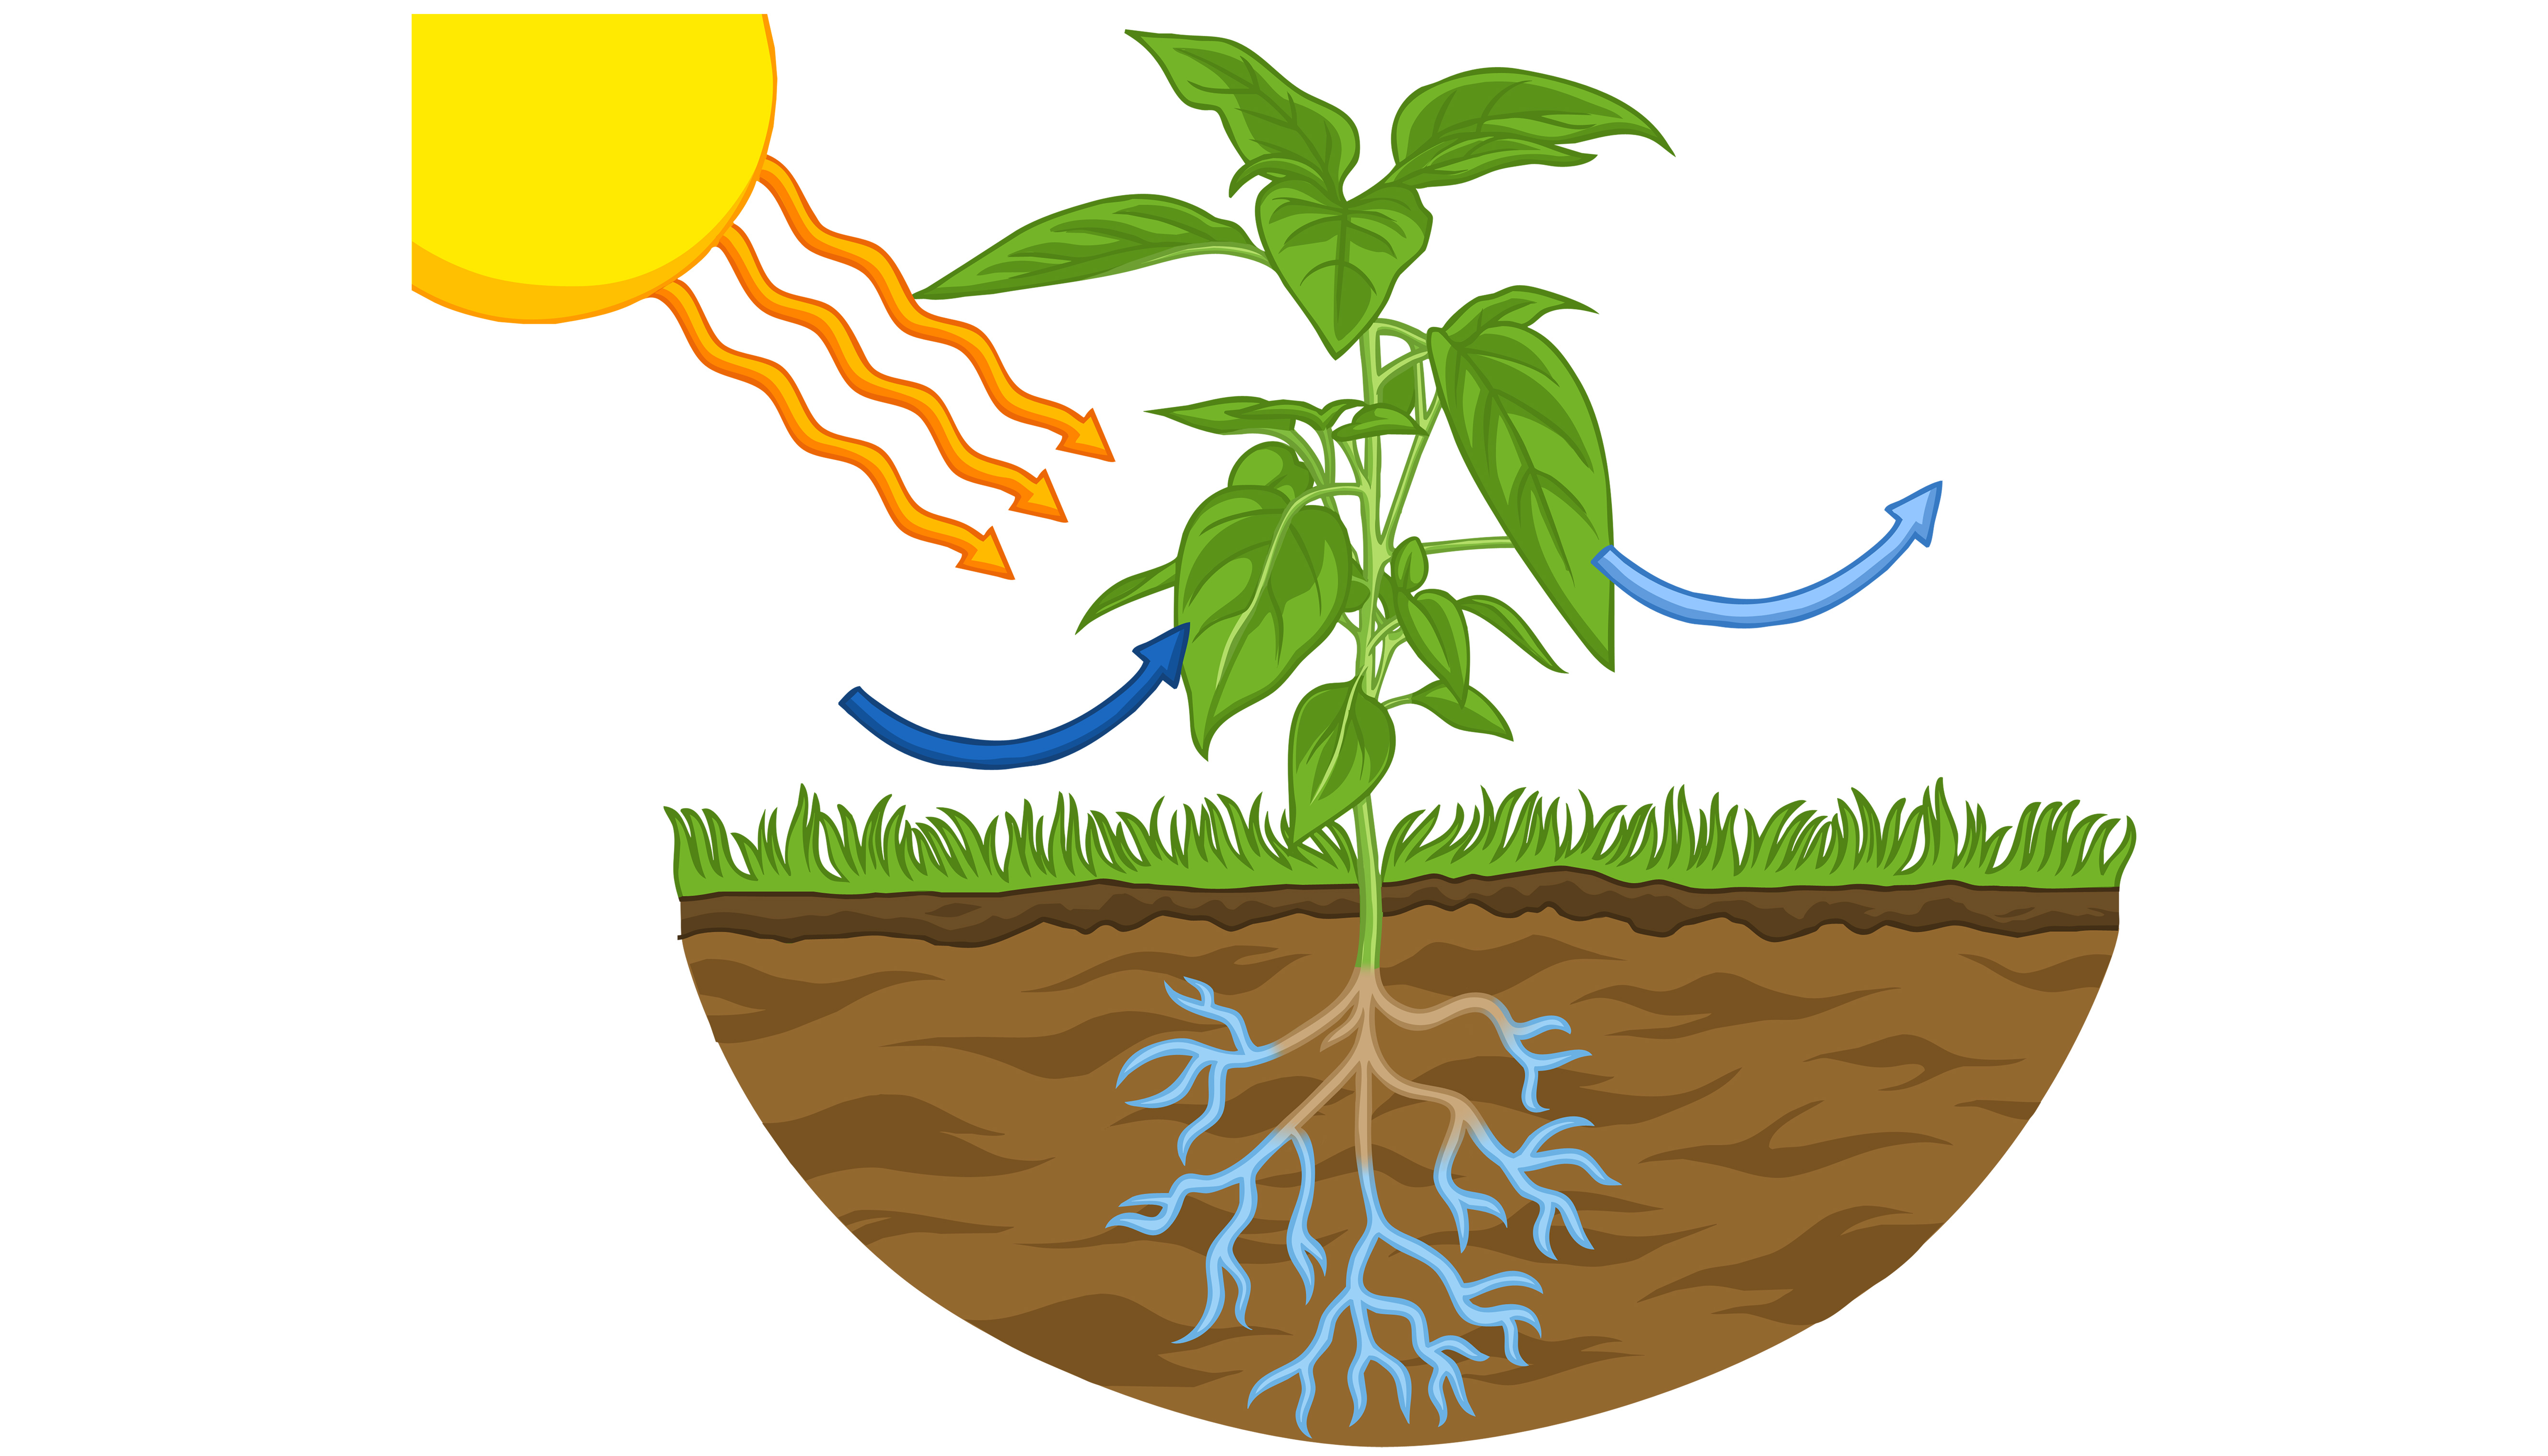 clipart photosynthesis light